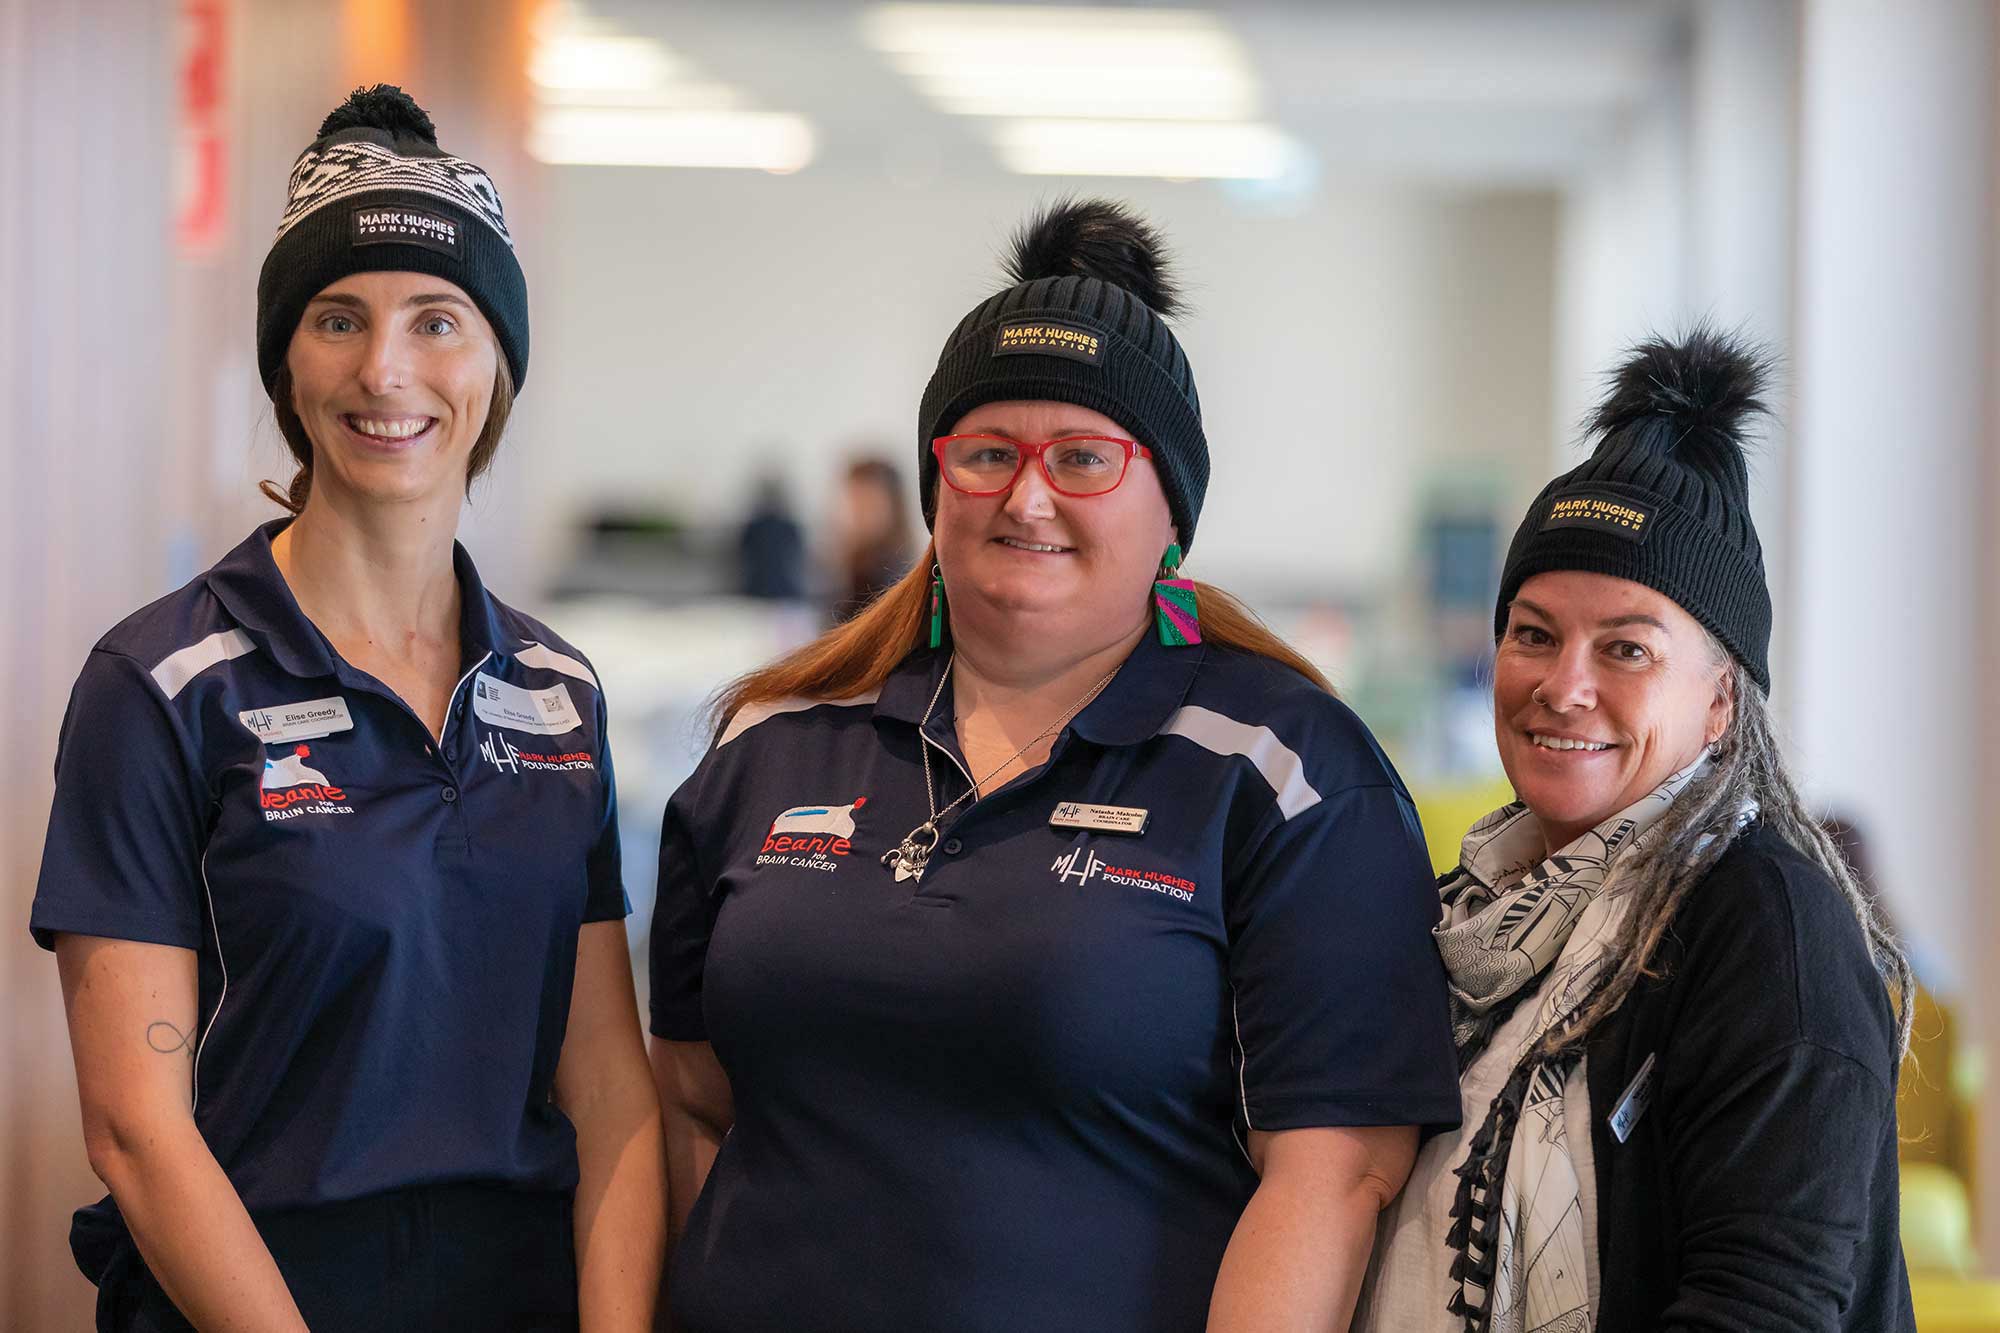 Three nurses in polo shirts and beanies smiling at the camera